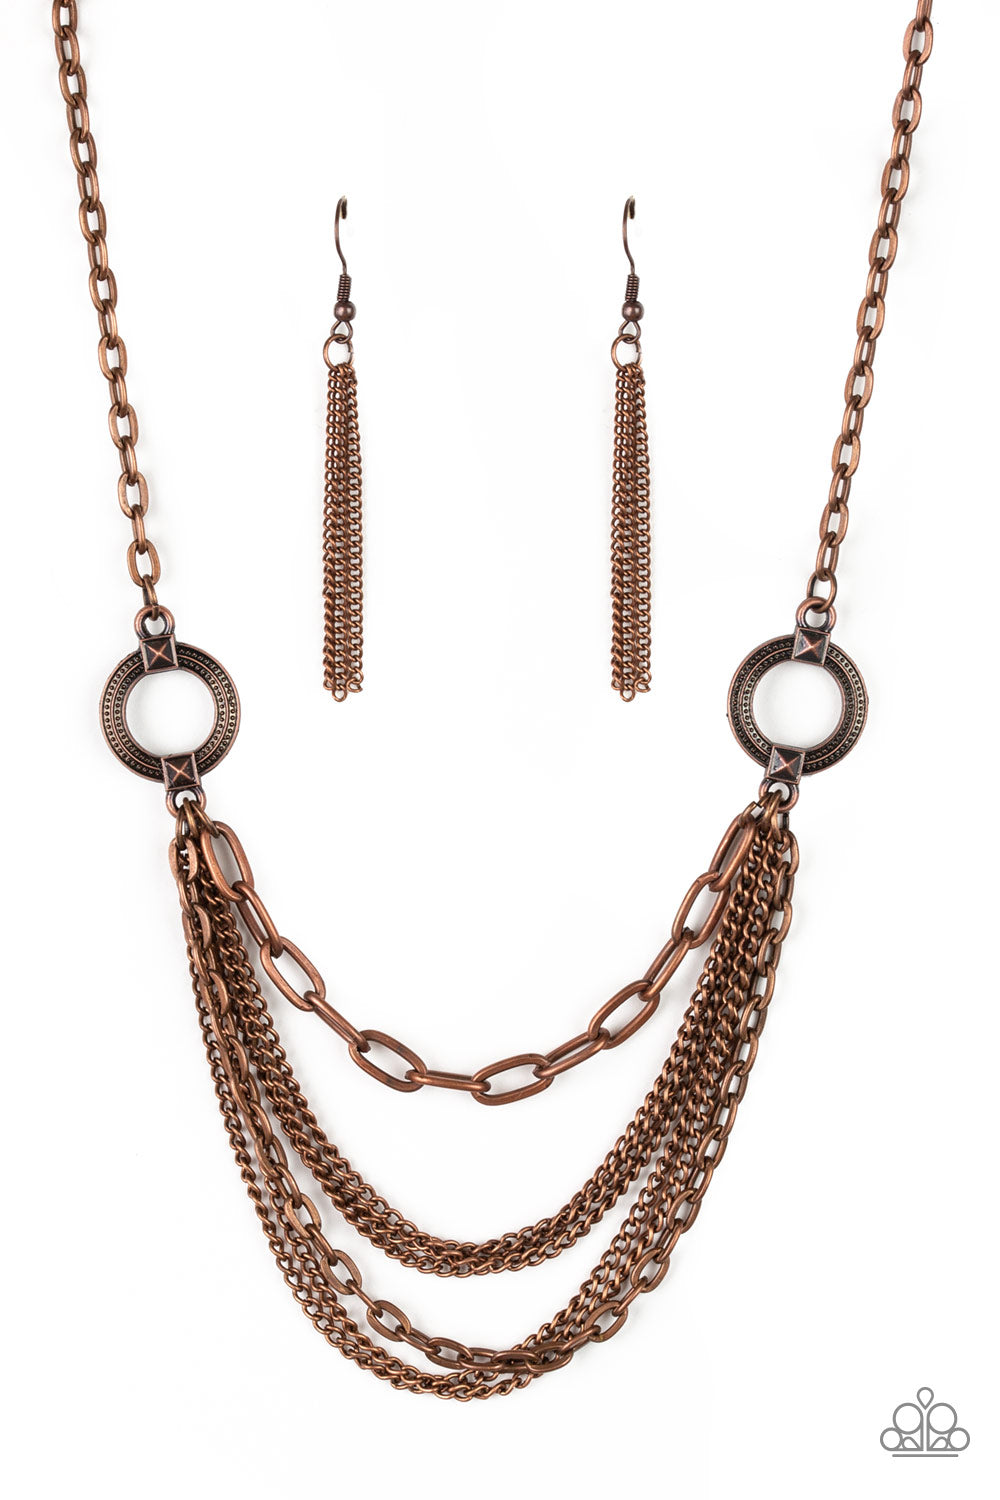 shop-sassy-affordable- chains-of-command-copper-paparazzi-accessories